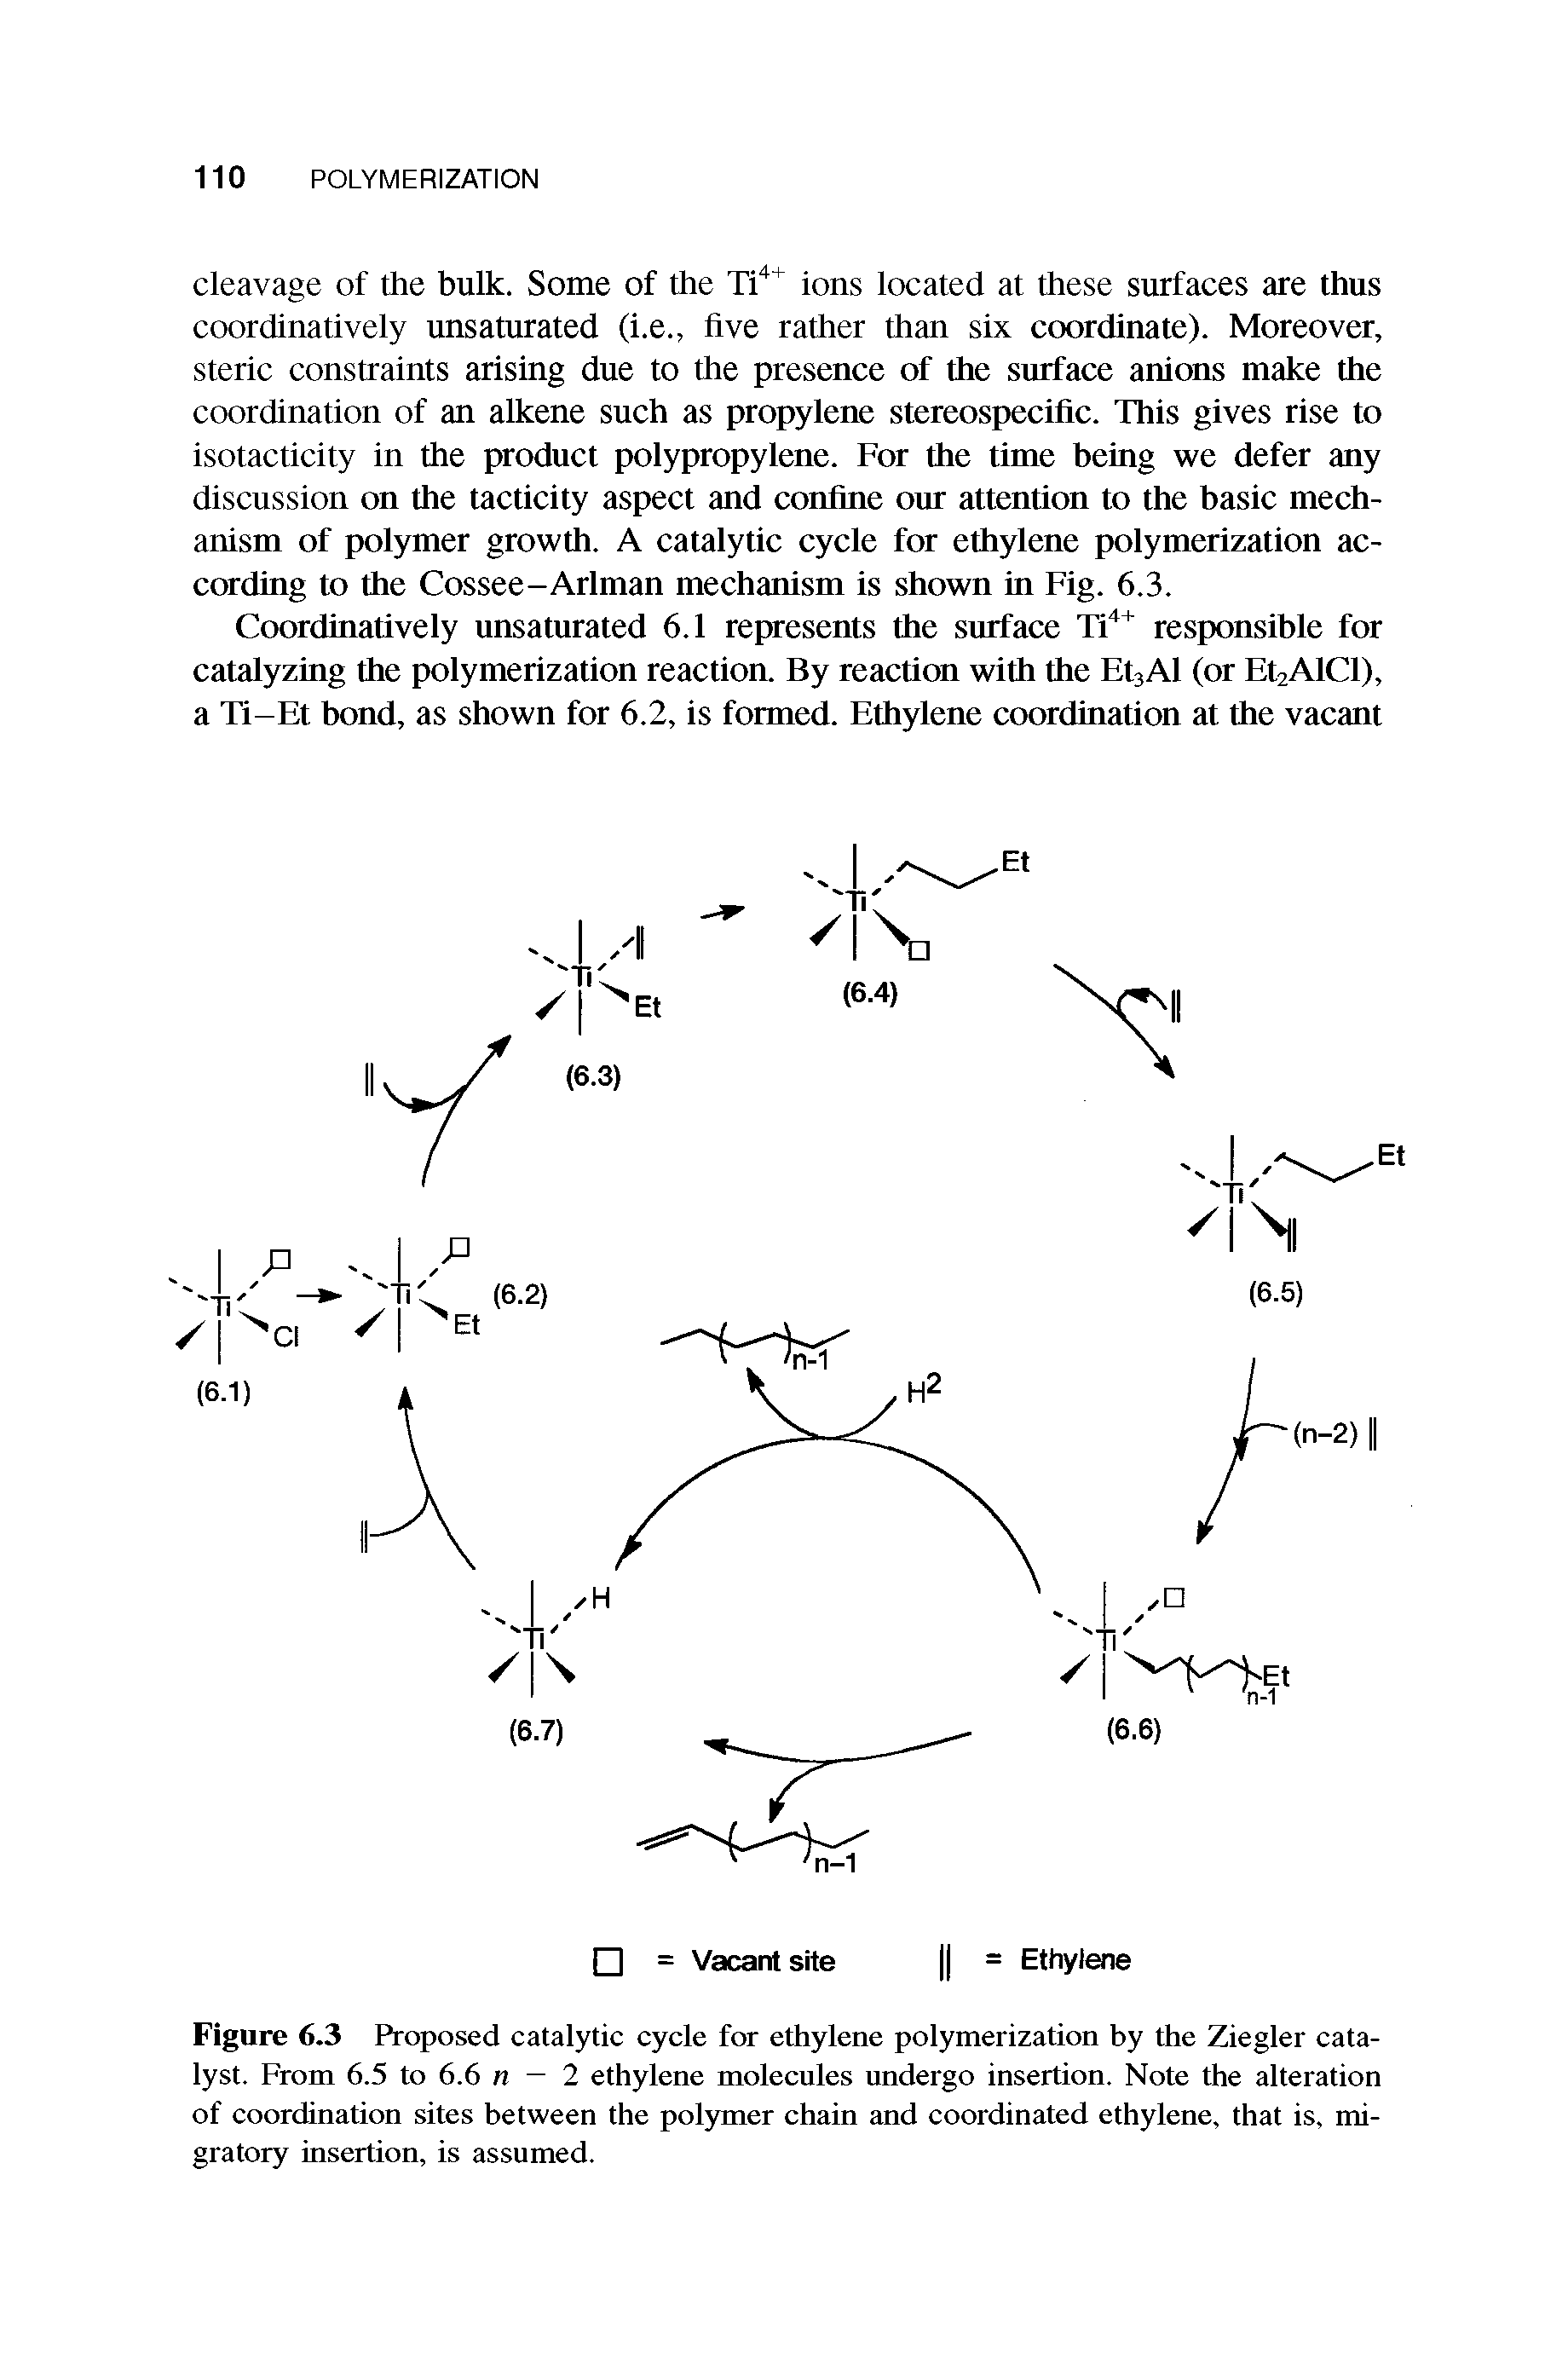 Figure 6.3 Proposed catalytic cycle for ethylene polymerization by the Ziegler catalyst. From 6.5 to 6.6 n — 2 ethylene molecules undergo insertion. Note the alteration of coordination sites between the polymer chain and coordinated ethylene, that is, migratory insertion, is assumed.